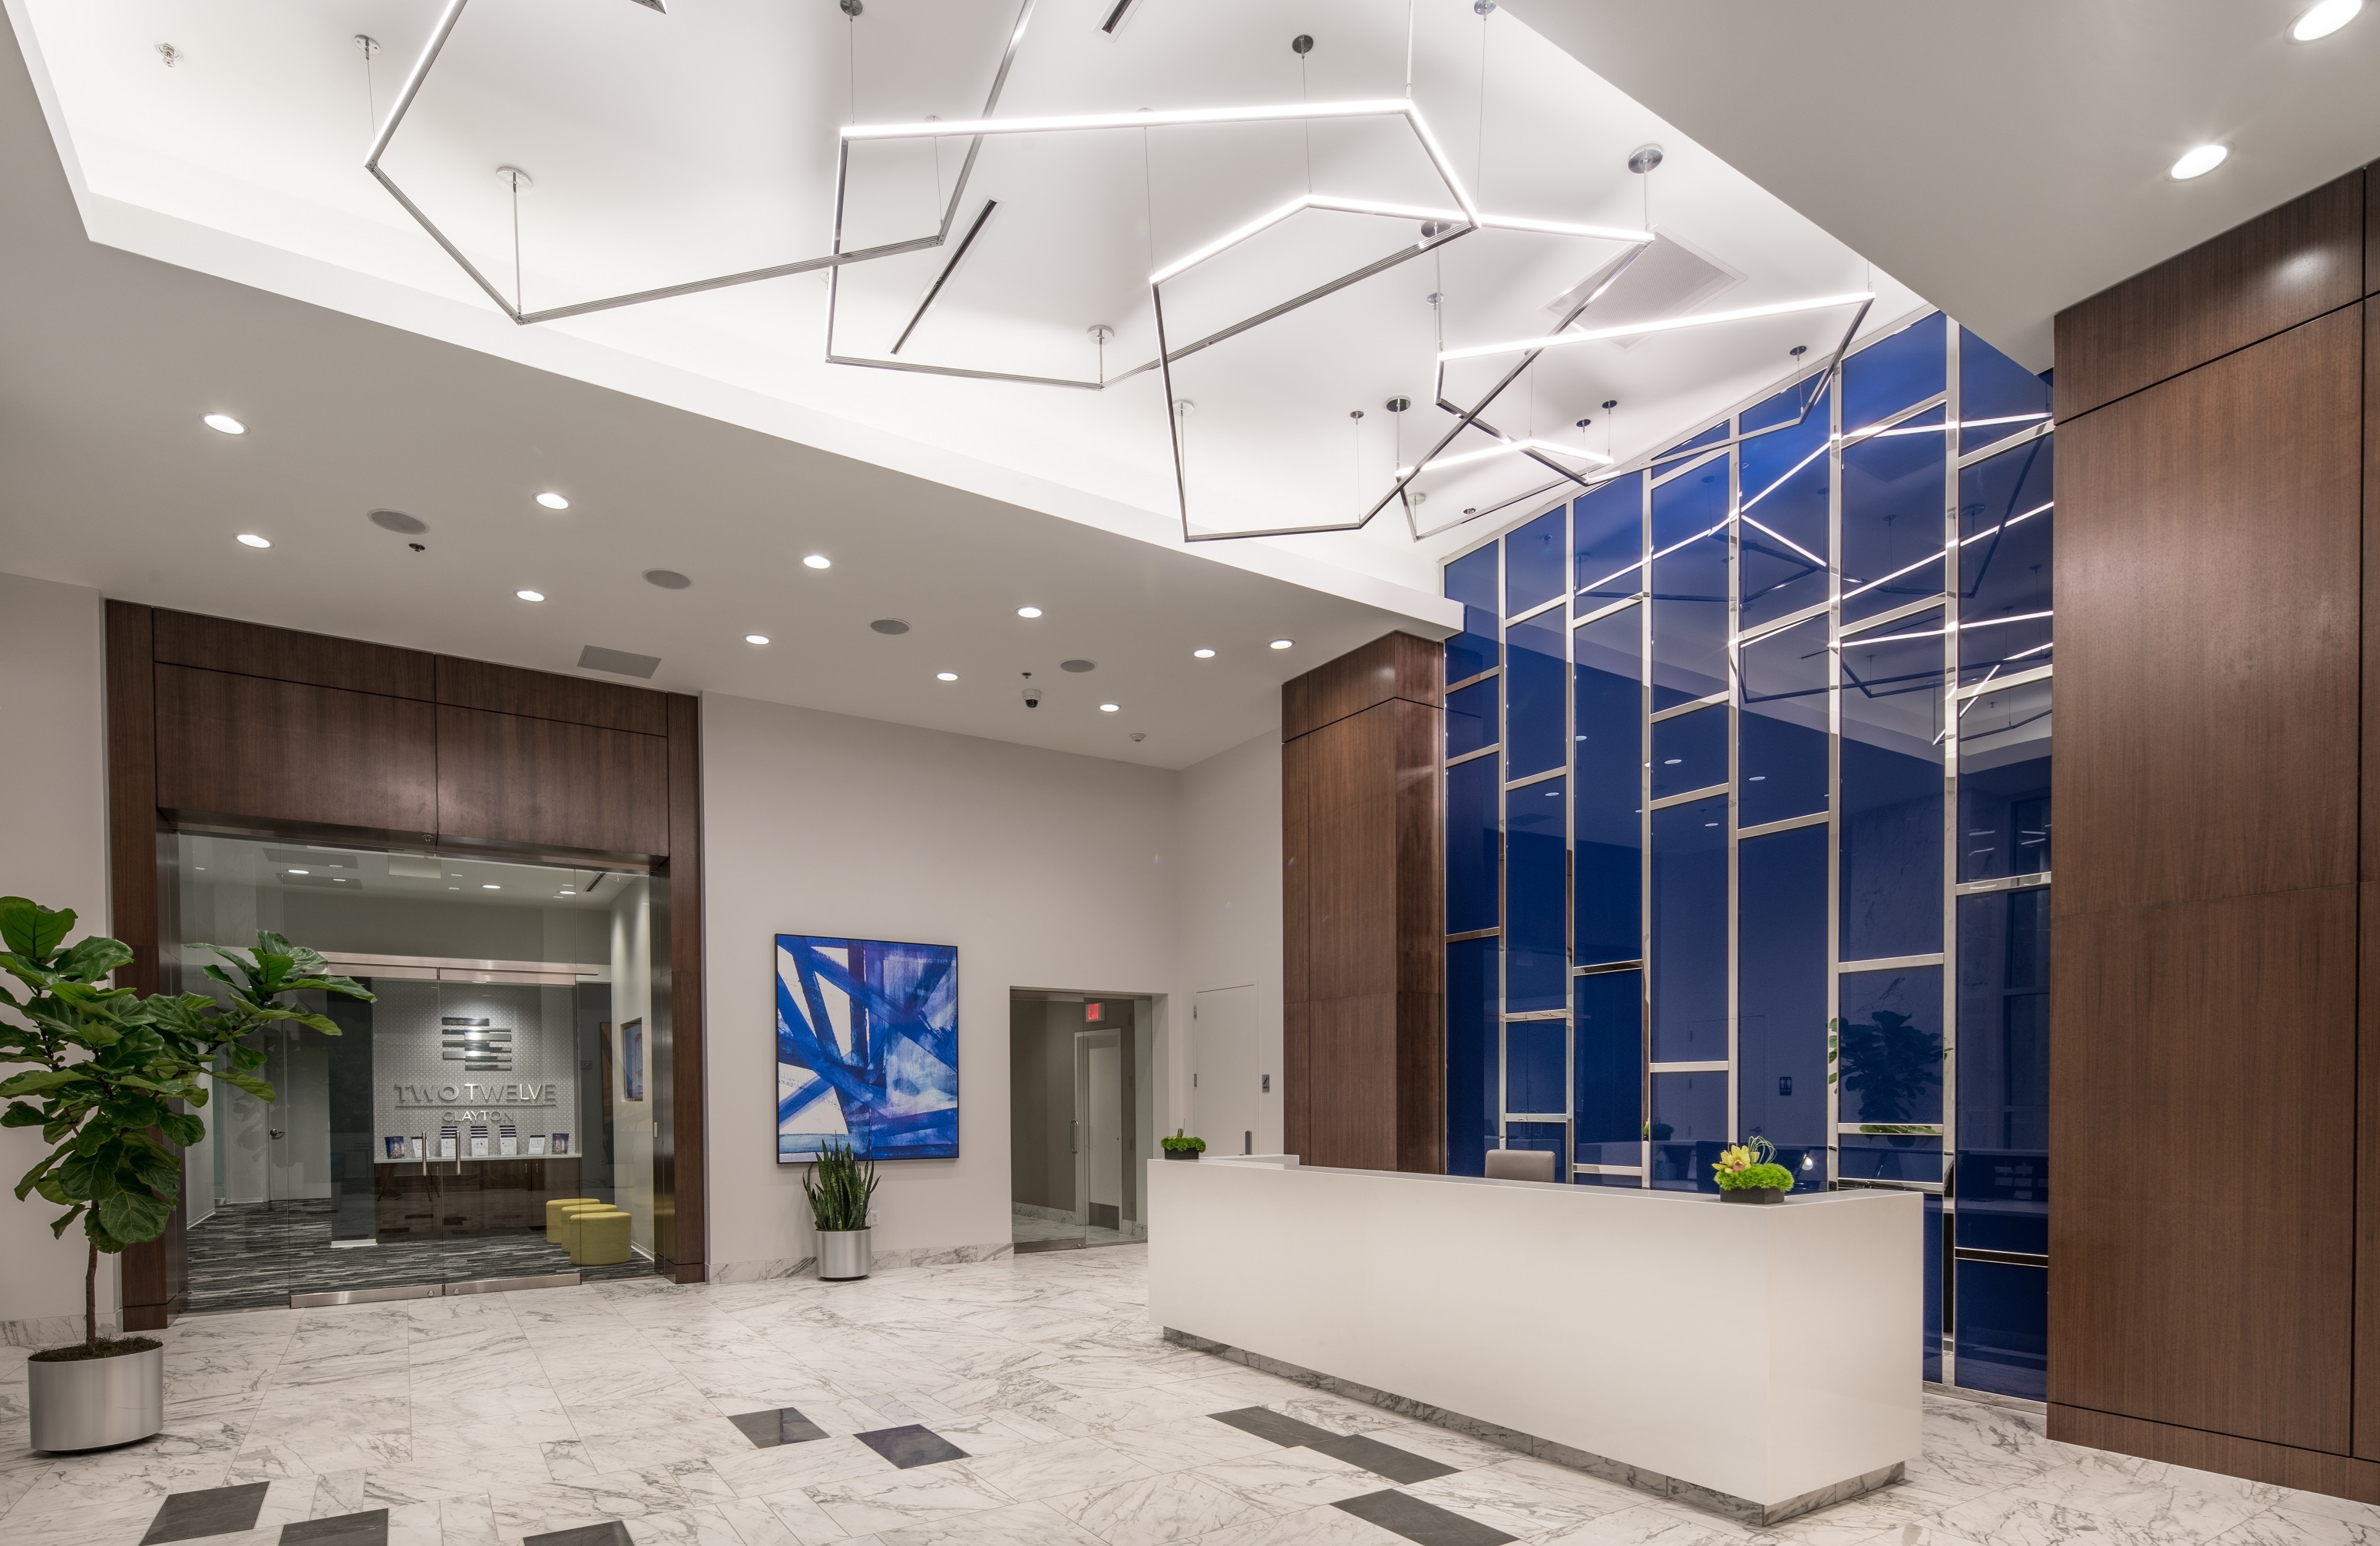 A 26-story, 382,666-square-foot mixed-use building. Retail space, lobby, and tenant amenities make up the first floor. Working in tandem with the architectural firm early in the process ensured this project ran smoothly, with no surprises.